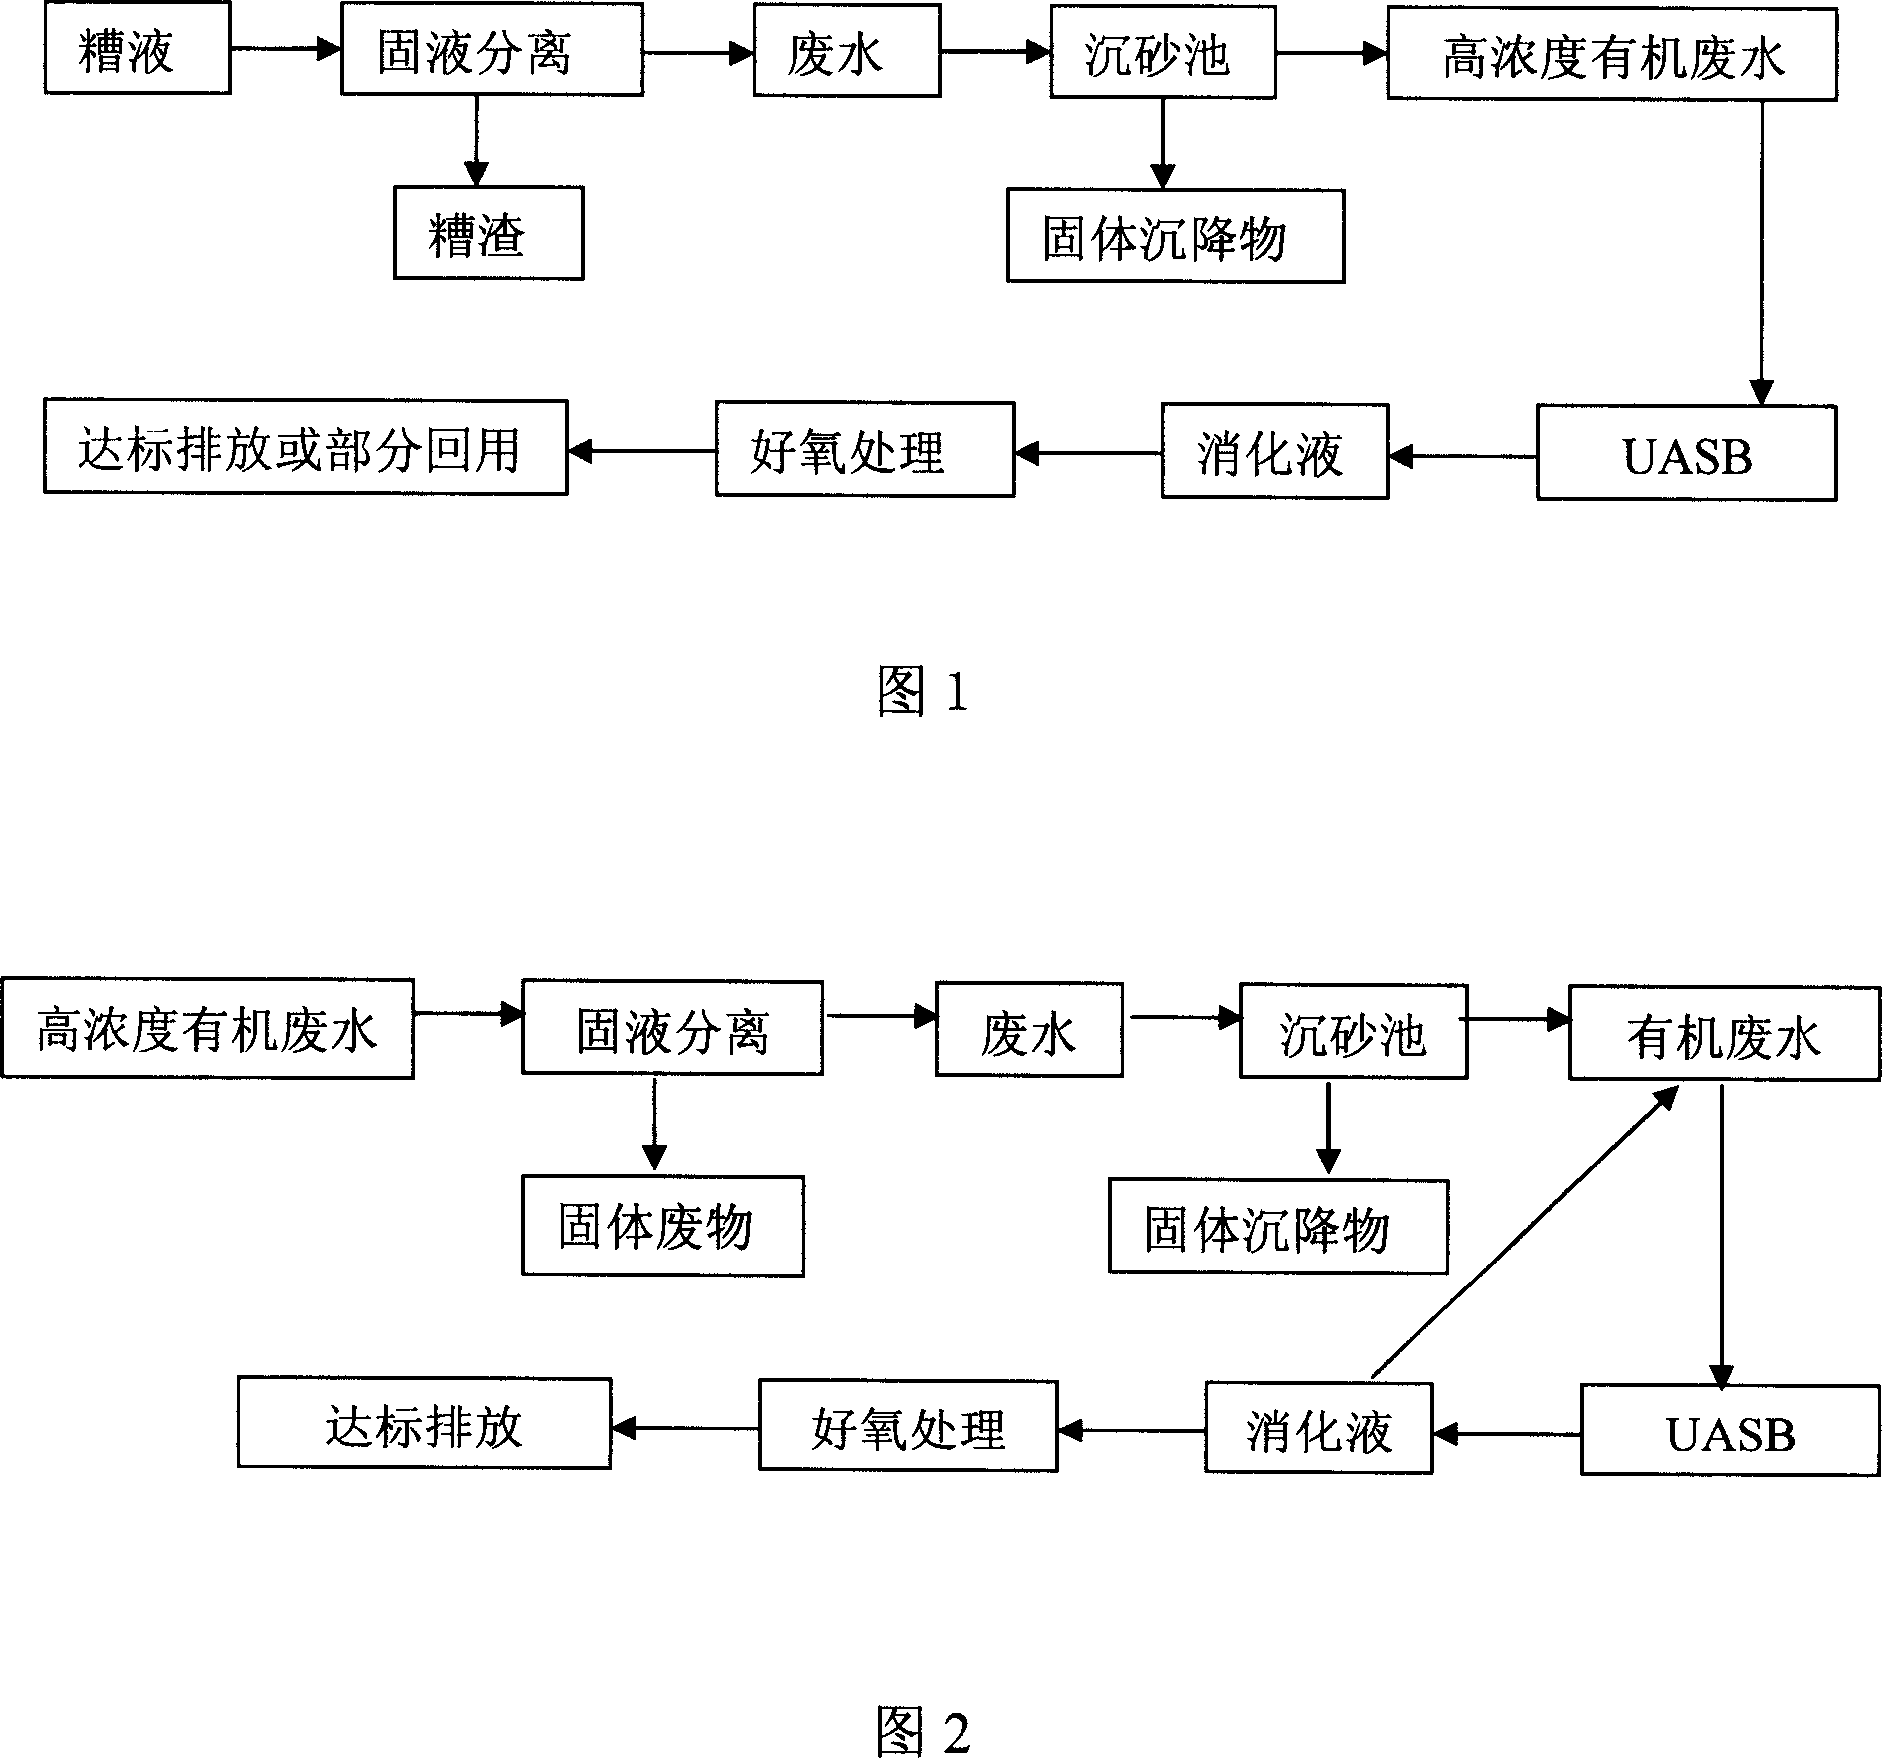 Method for processing organic wastewater